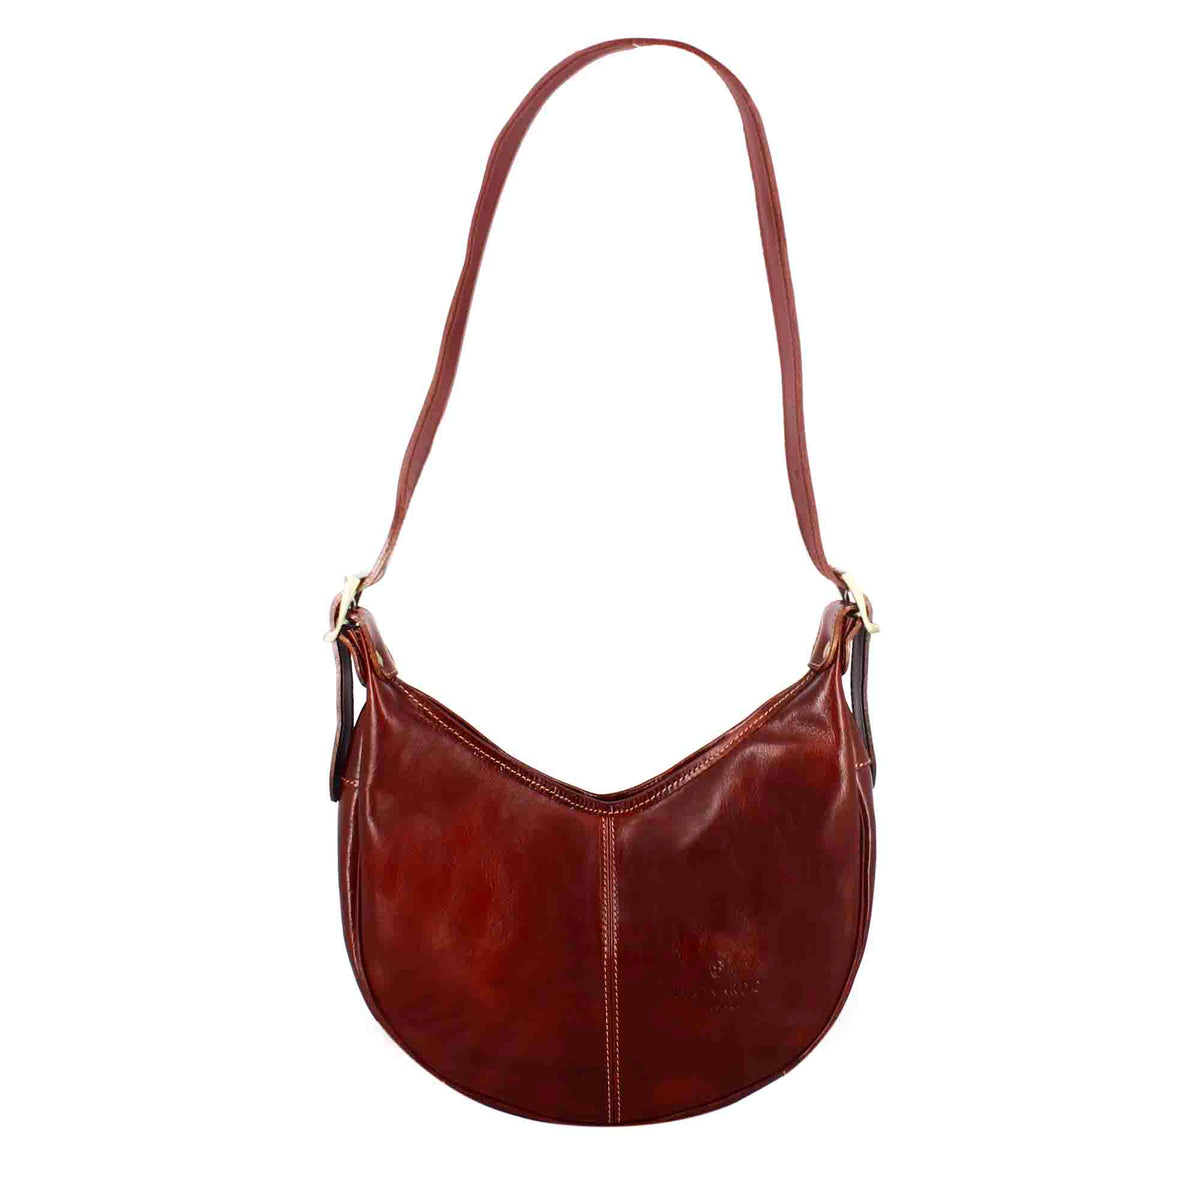 Classic women's City shopper bag in brown smooth leather